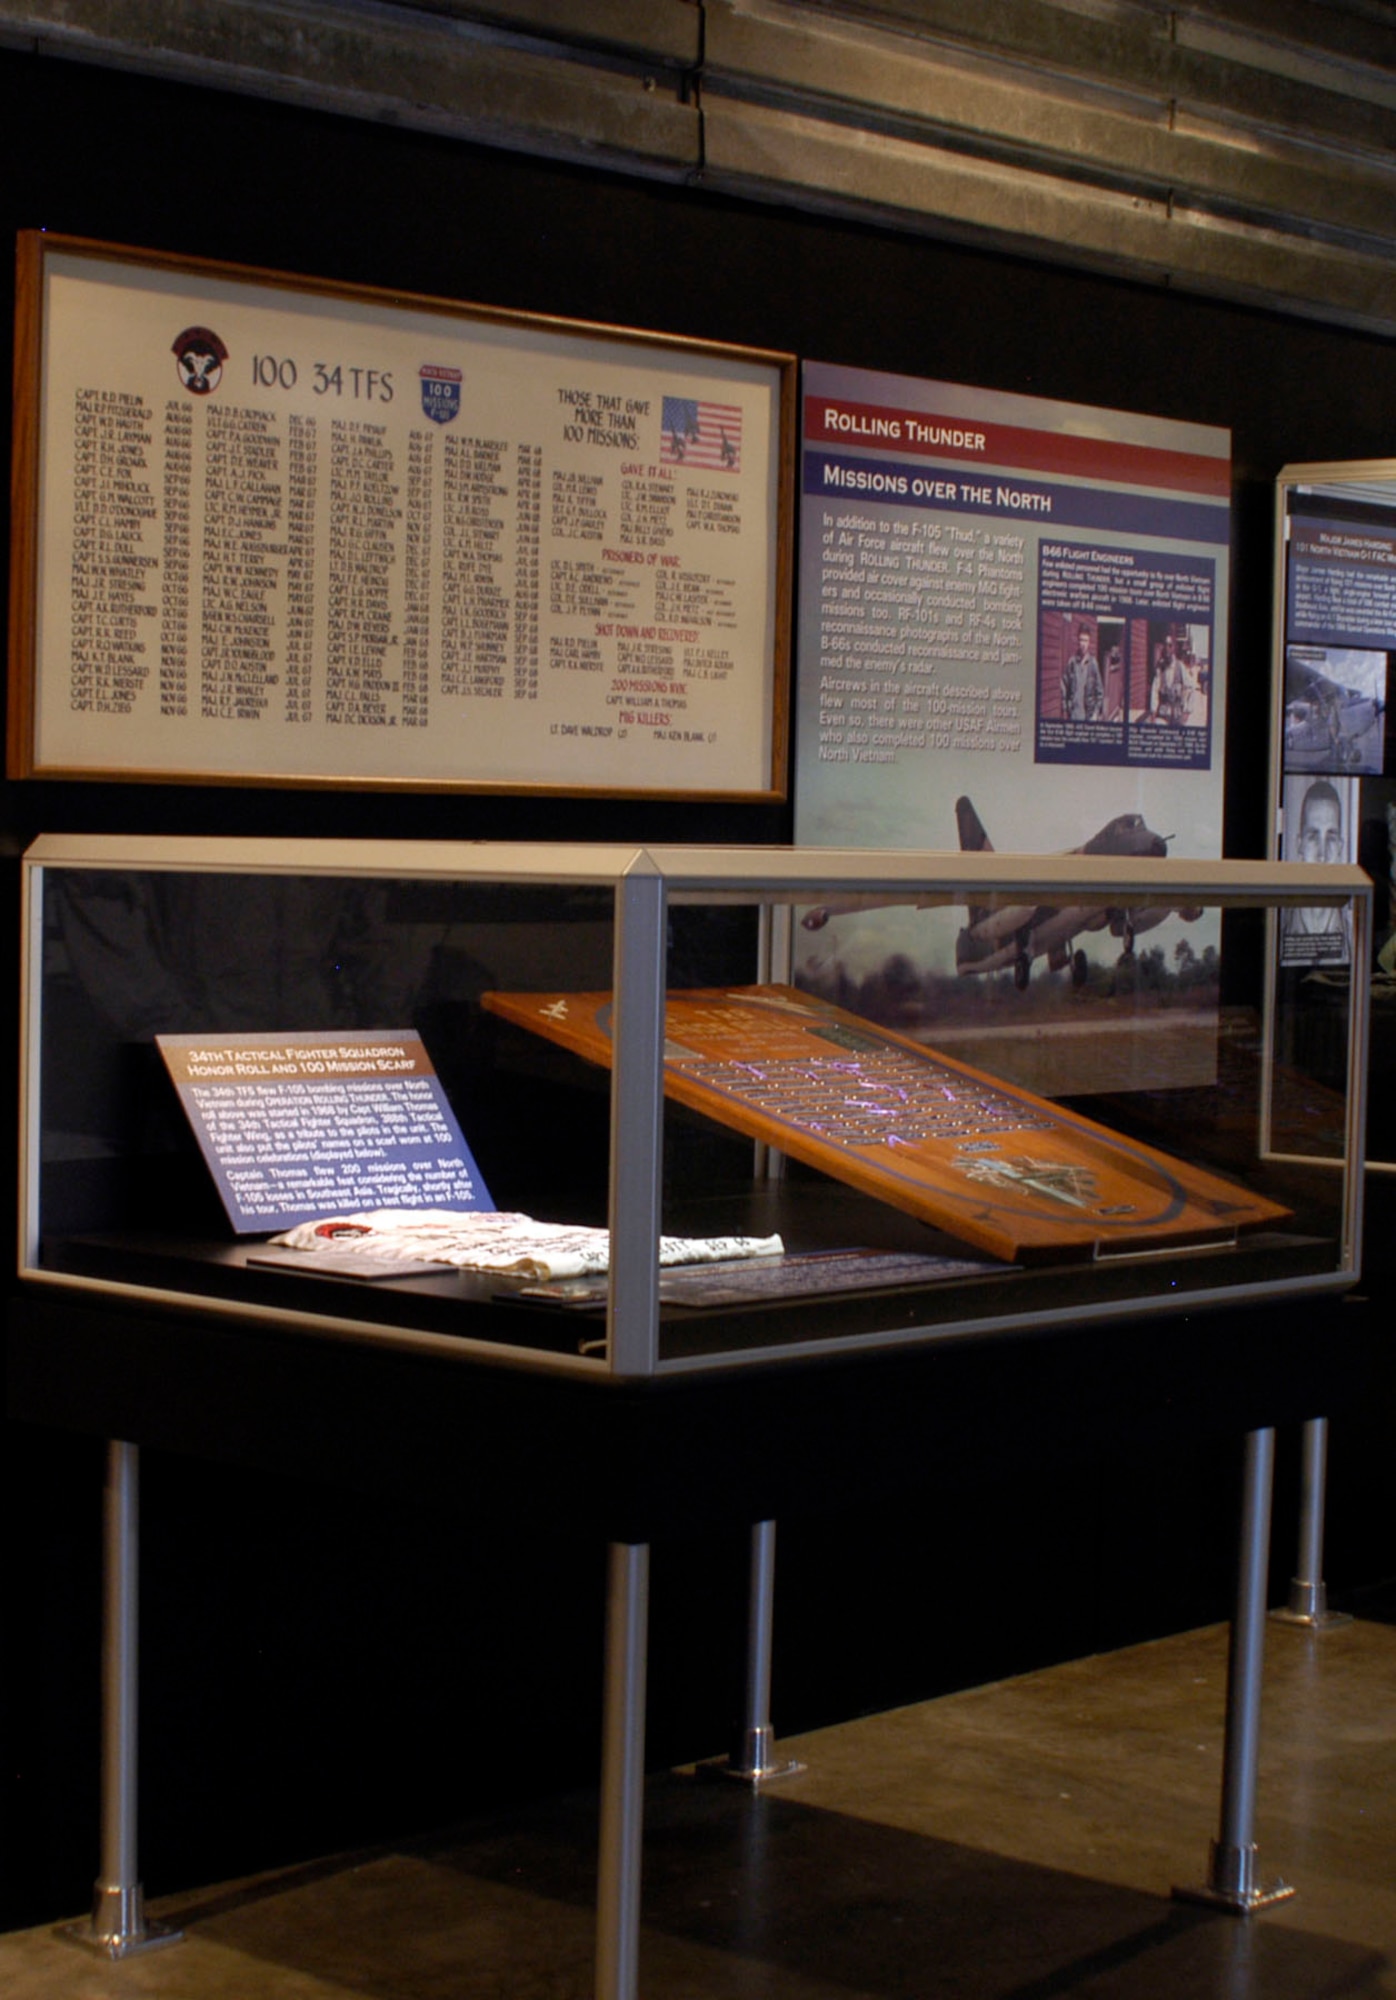 DAYTON, Ohio - 34th Tactical Fighter Squadron Honor Roll and 100 Mission Scarf, 20th Tactical Reconnaissance Squadron Honor Roll and 20th TRS patch on display in the 100 Missions Up North exhibit in the Southeast Asia War Gallery at the National Museum of the U.S. Air Force. (U.S. Air Force photo)